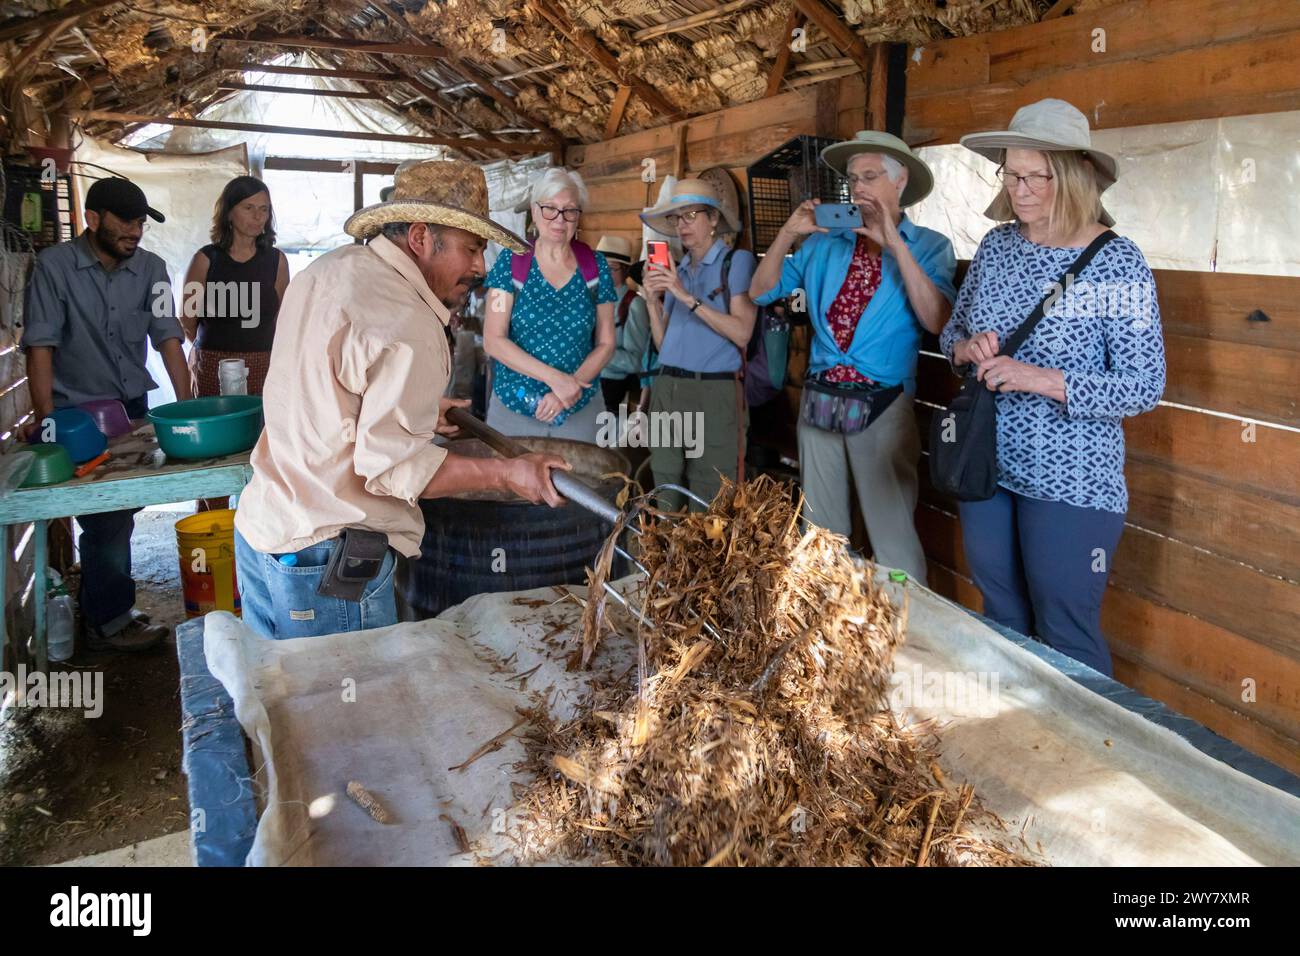 San Pablo Huitzo, Oaxaca, Mexico - Porfirio Morales places a growing medium for oyster mushrooms on a work table. Visitors, who are learning about mus Stock Photo